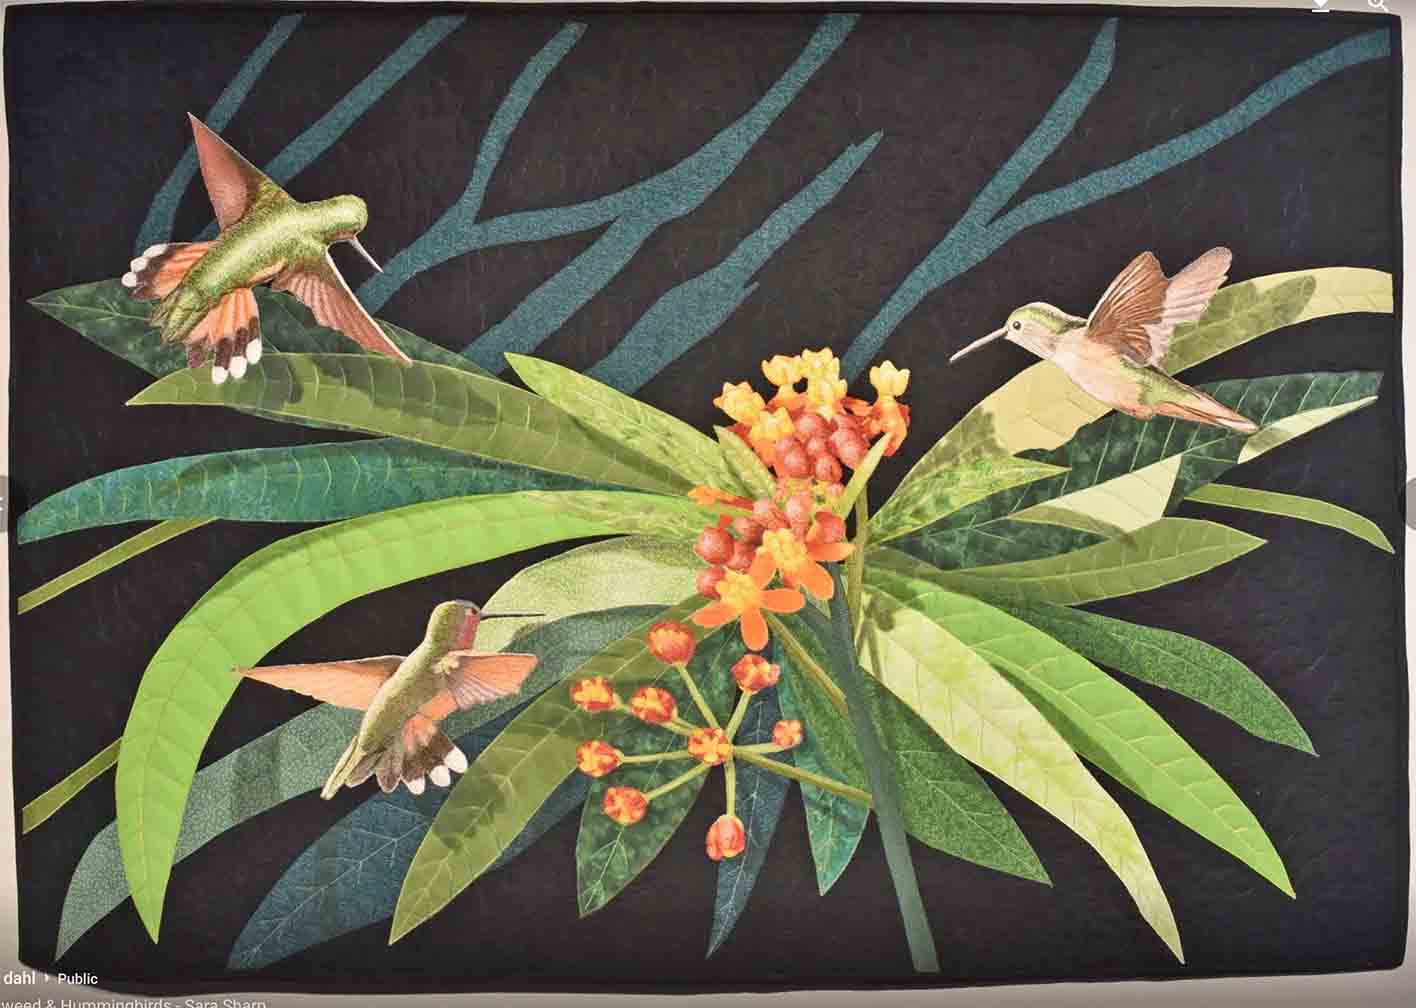 art quilt in horizontal orientation with image of a milkweed plant and hummingbirds